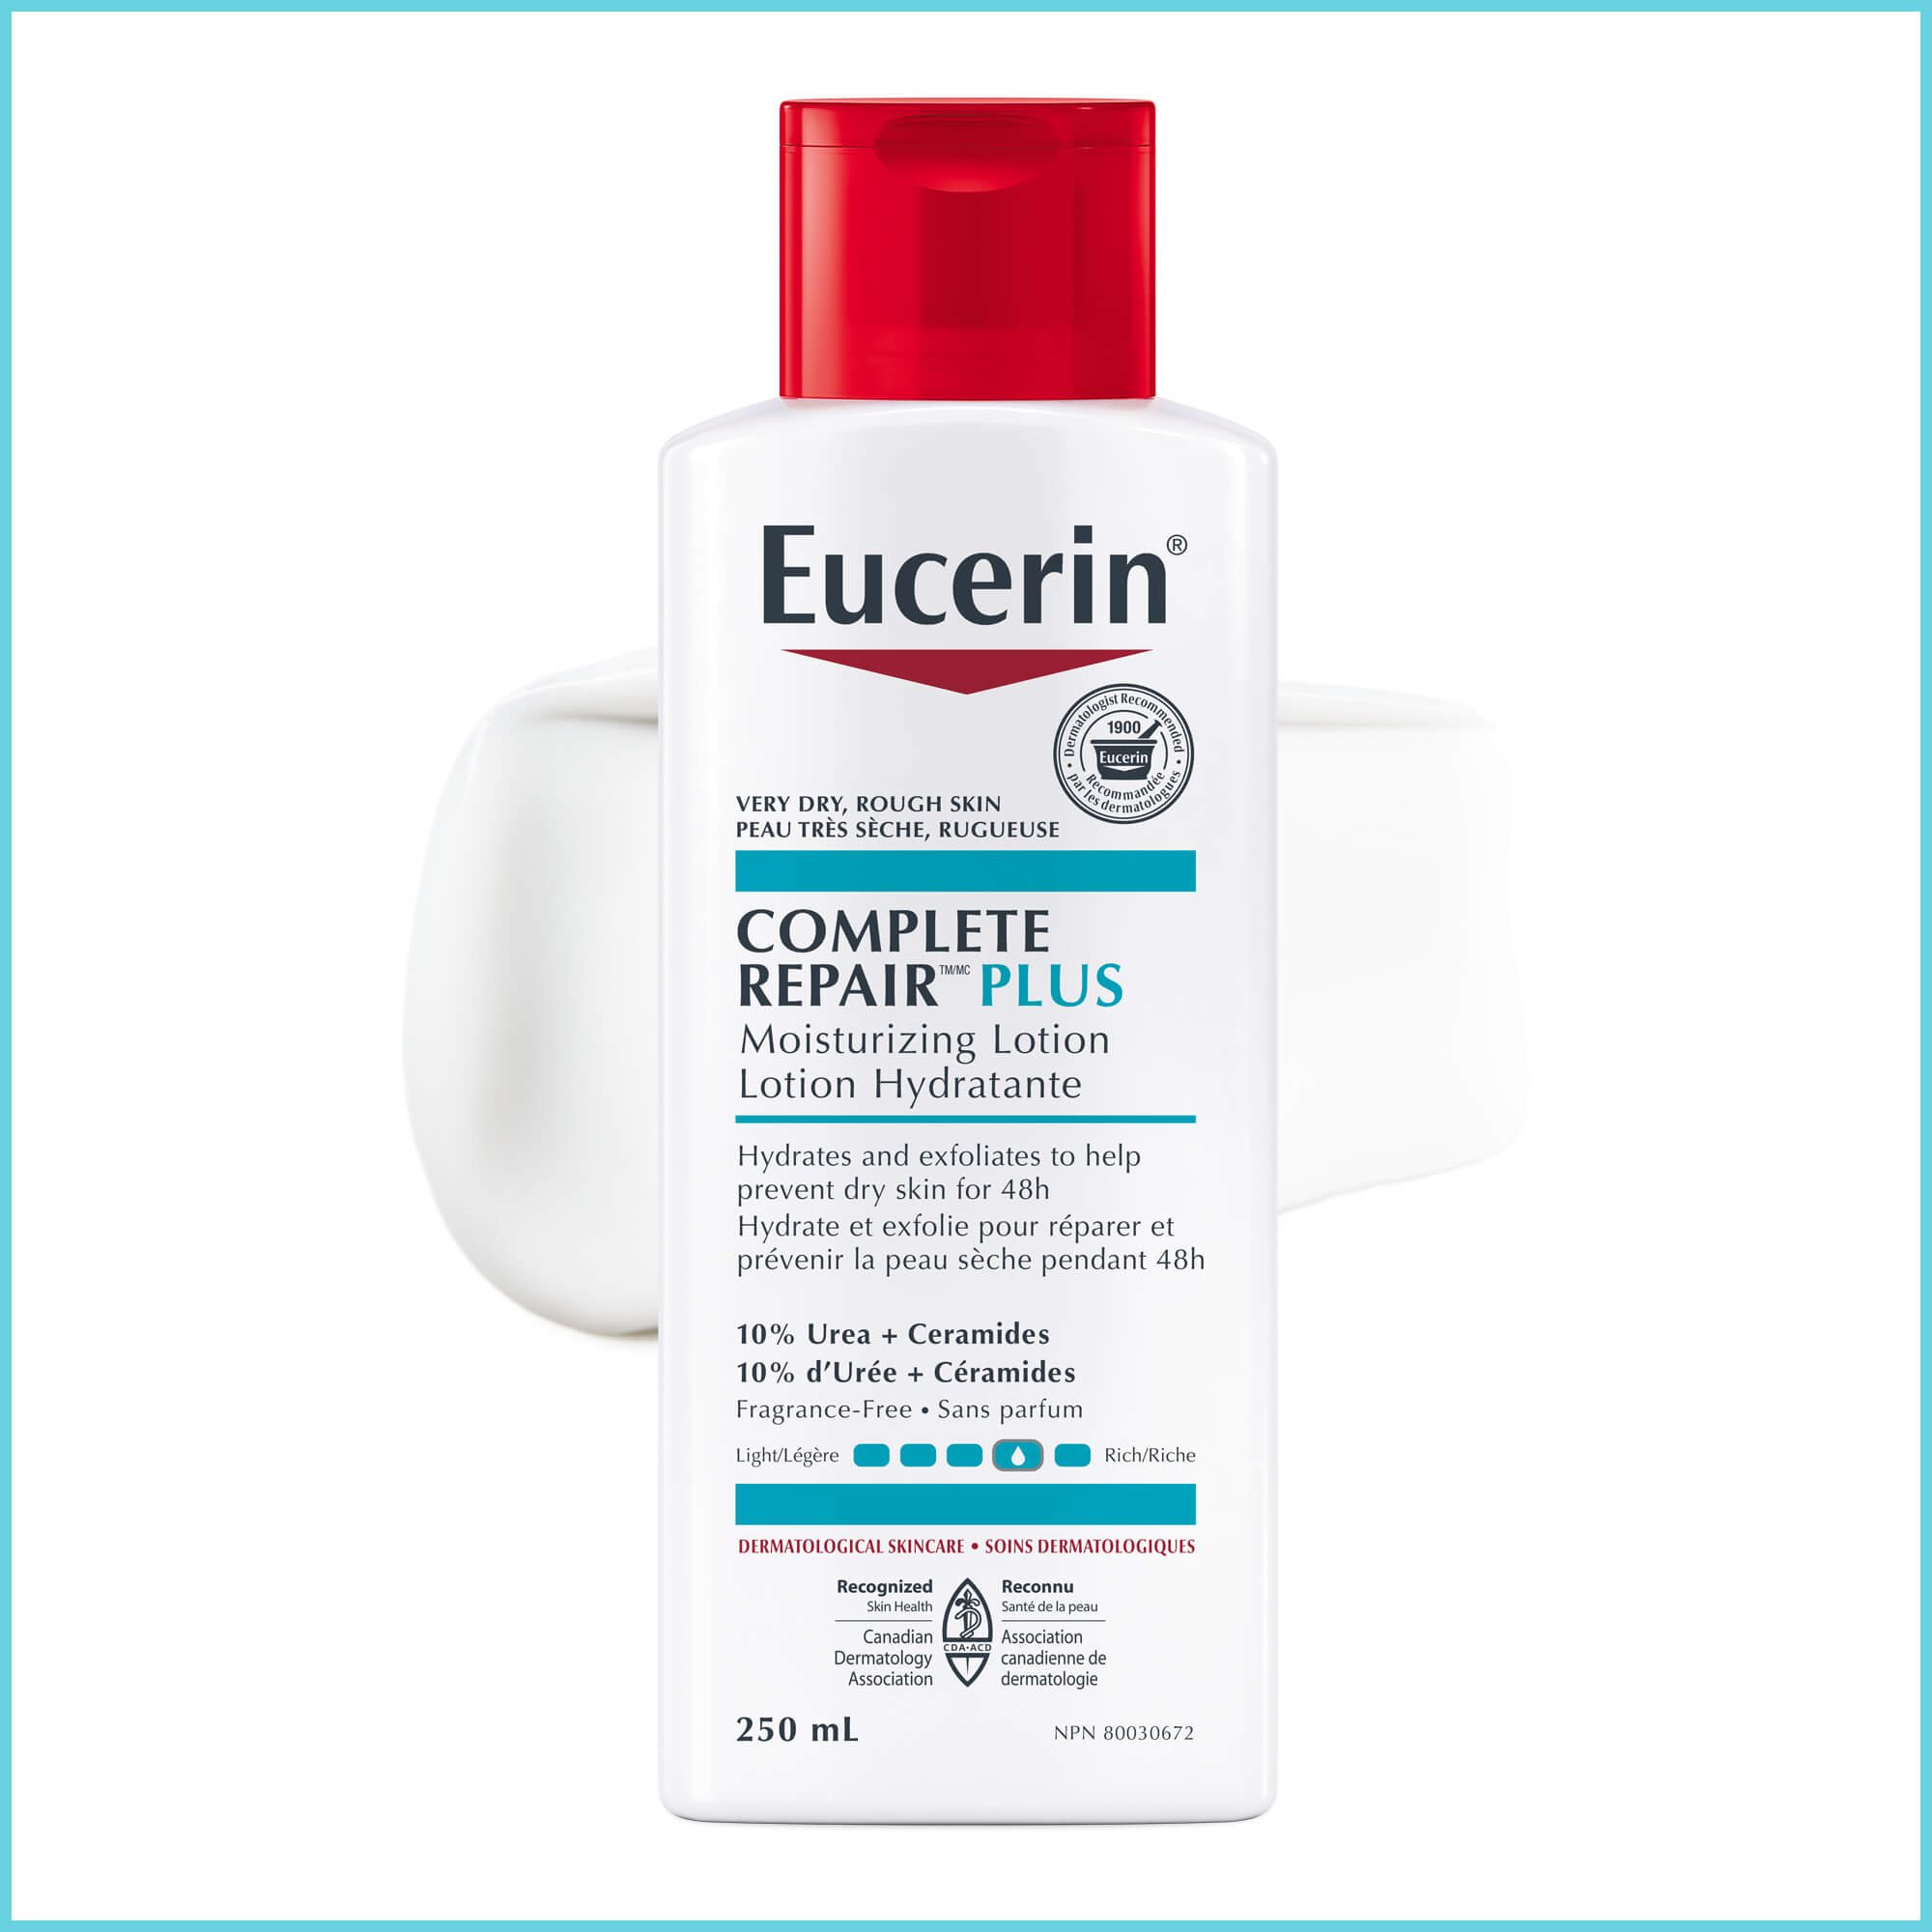 Image of The Eucerin Complete Repair Lotion Plus against a white background with product spread behind it.